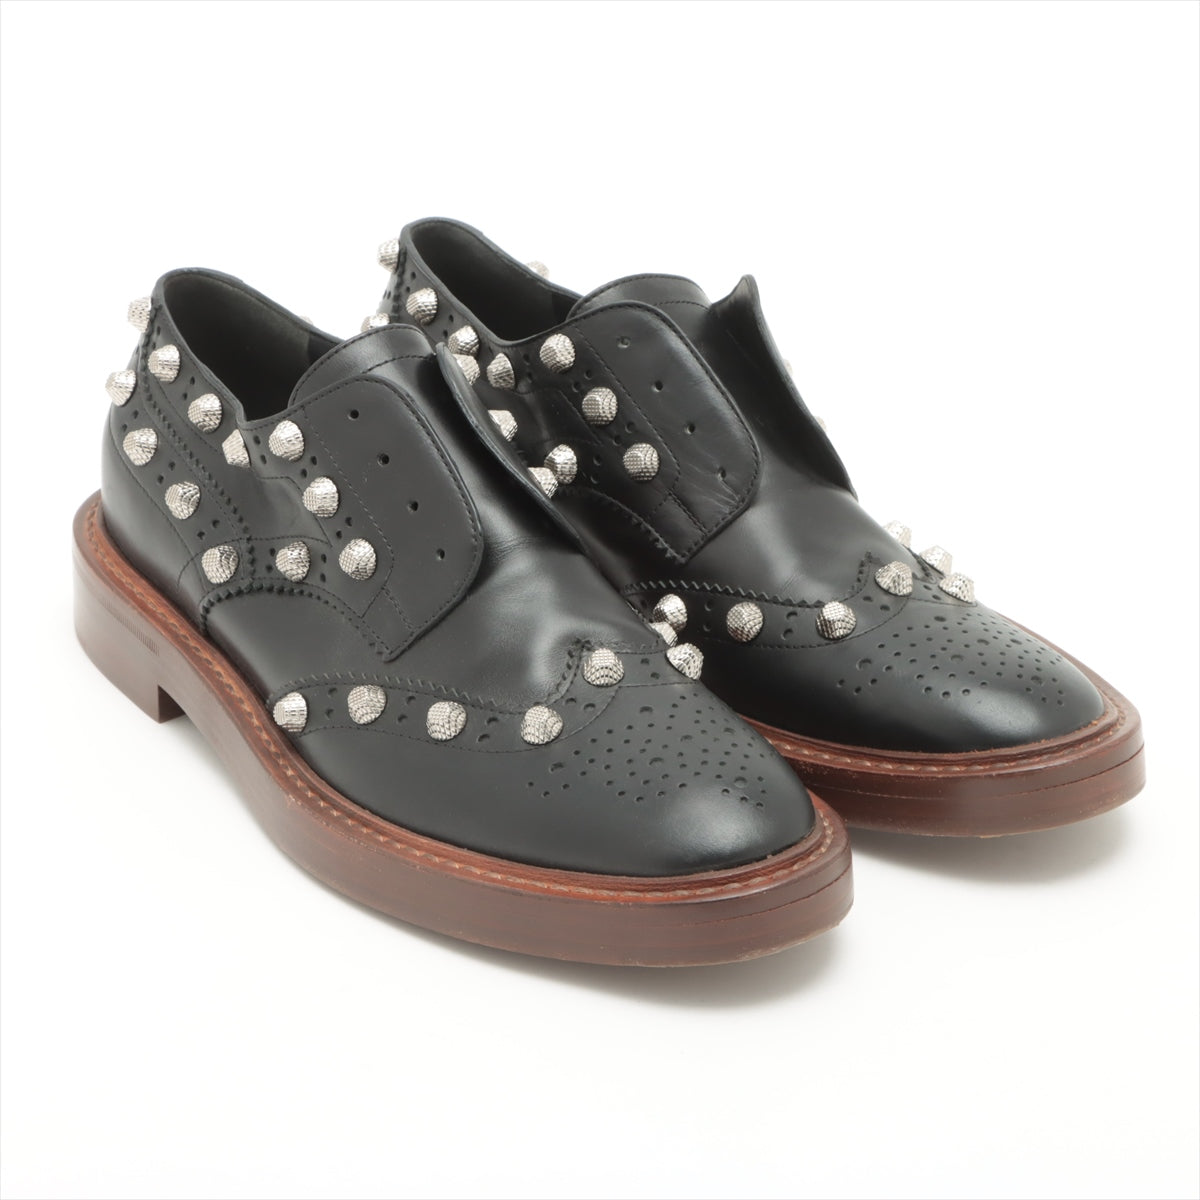 Balenciaga Leather Leather shoes 40 Men's Black × Brown Studs Slip-on wingtip